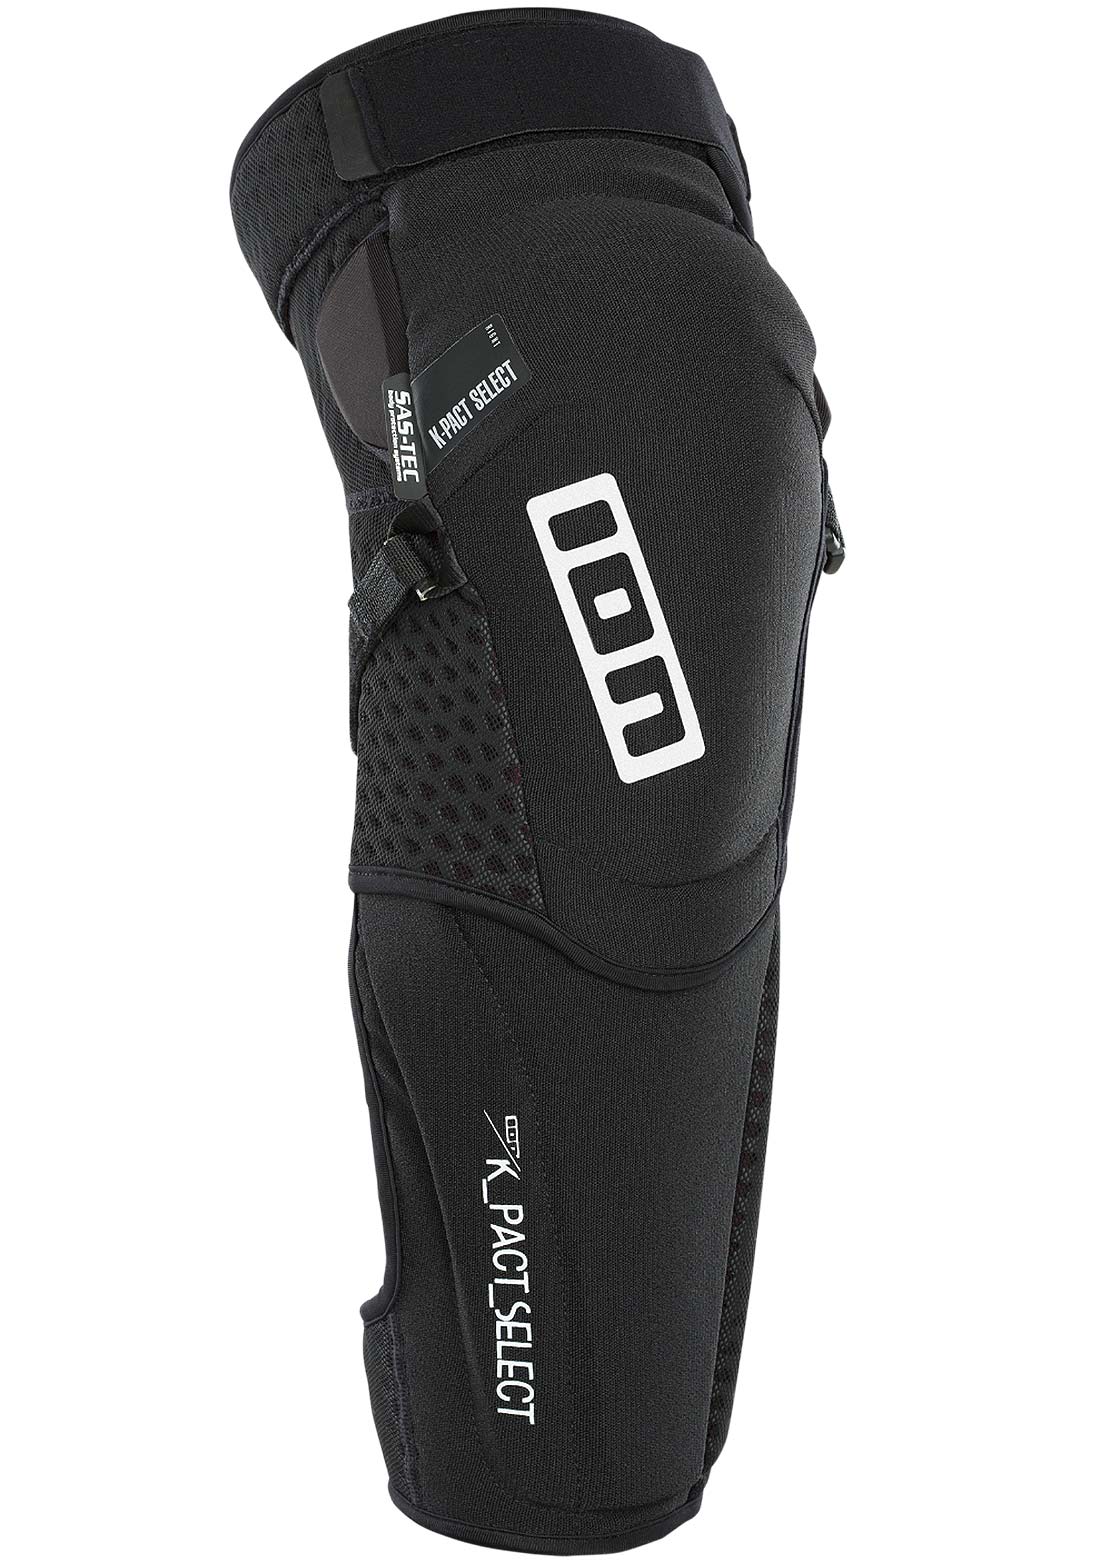 ION Unisex K-Pact Select Knee Pads